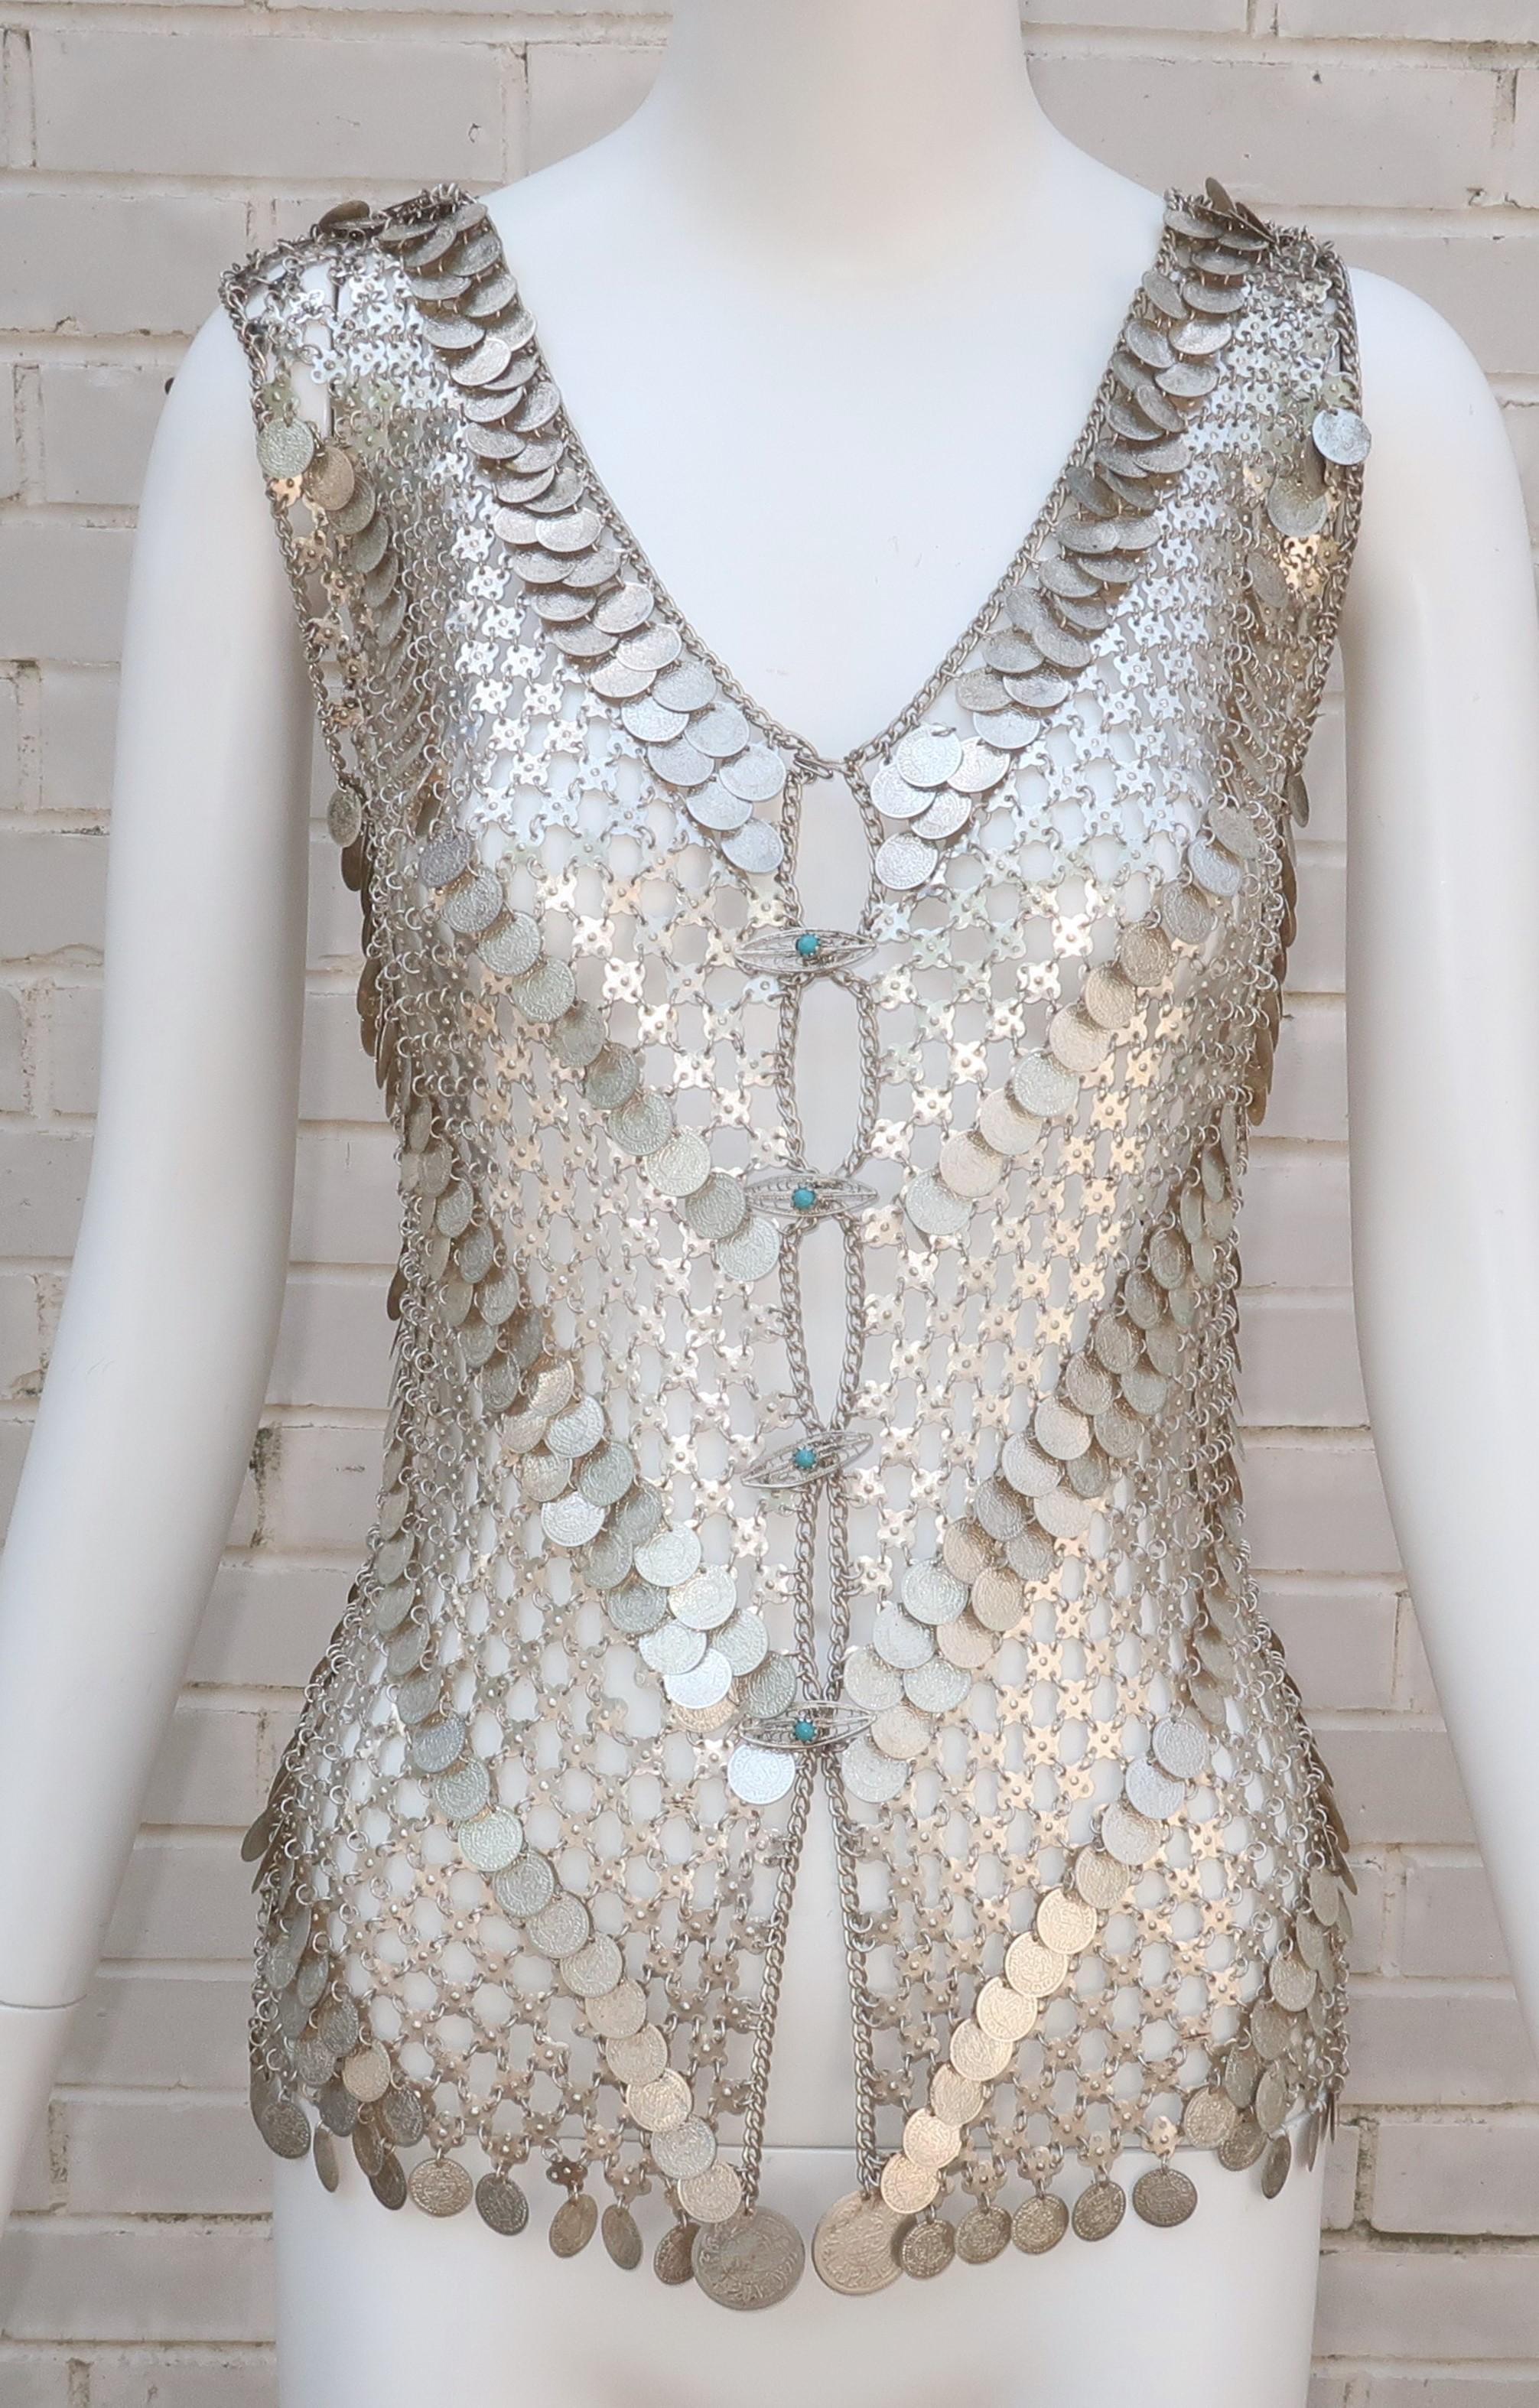 Put on your fashion armor with this 1960's silver metal chain link vest with coin embellishments throughout.  The v-shaped vest closes at the front with a top hook and diamond shaped metal 'buttons' accented by turquoise glass beads.  The exotic